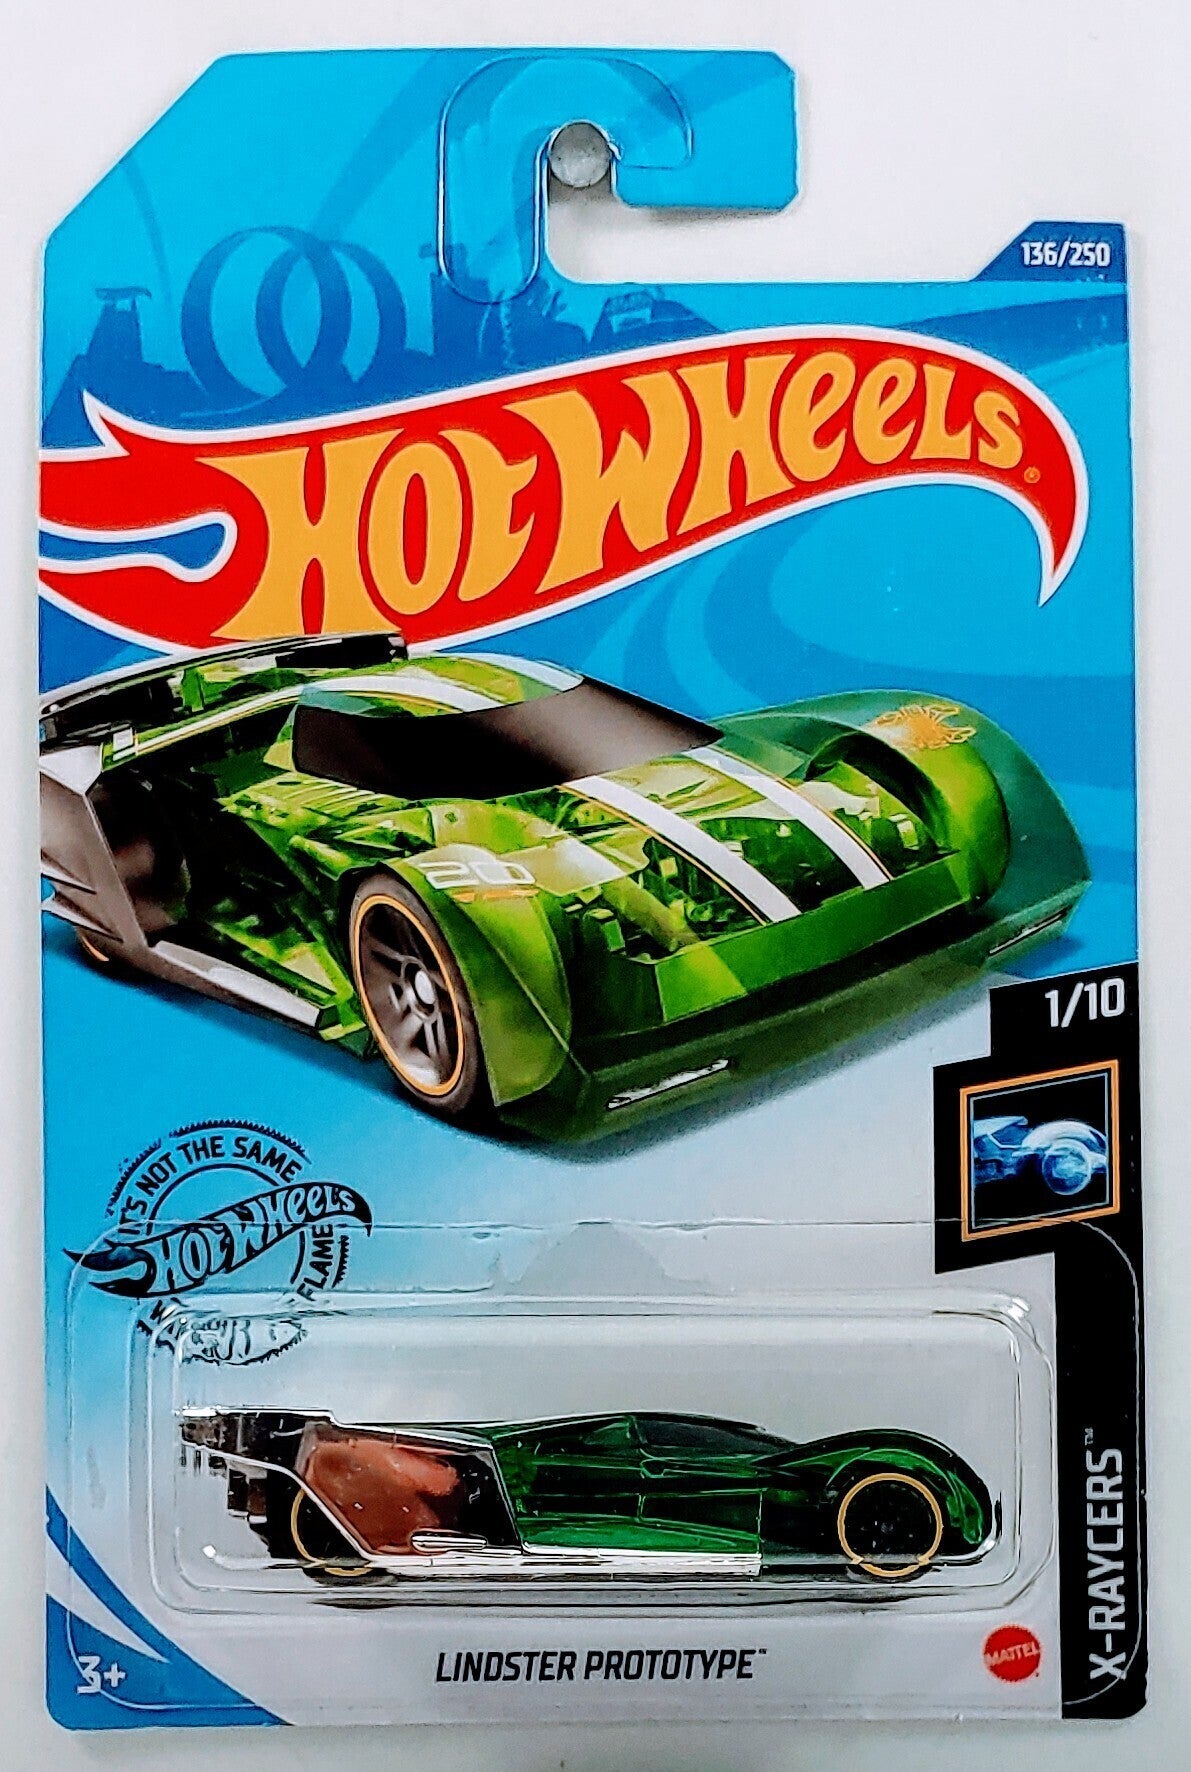 Hot Wheels 2020 - Collector # 136/250 - X-Raycers 1/10 - New Models - Lindster Prototype - Transparent Green - IC